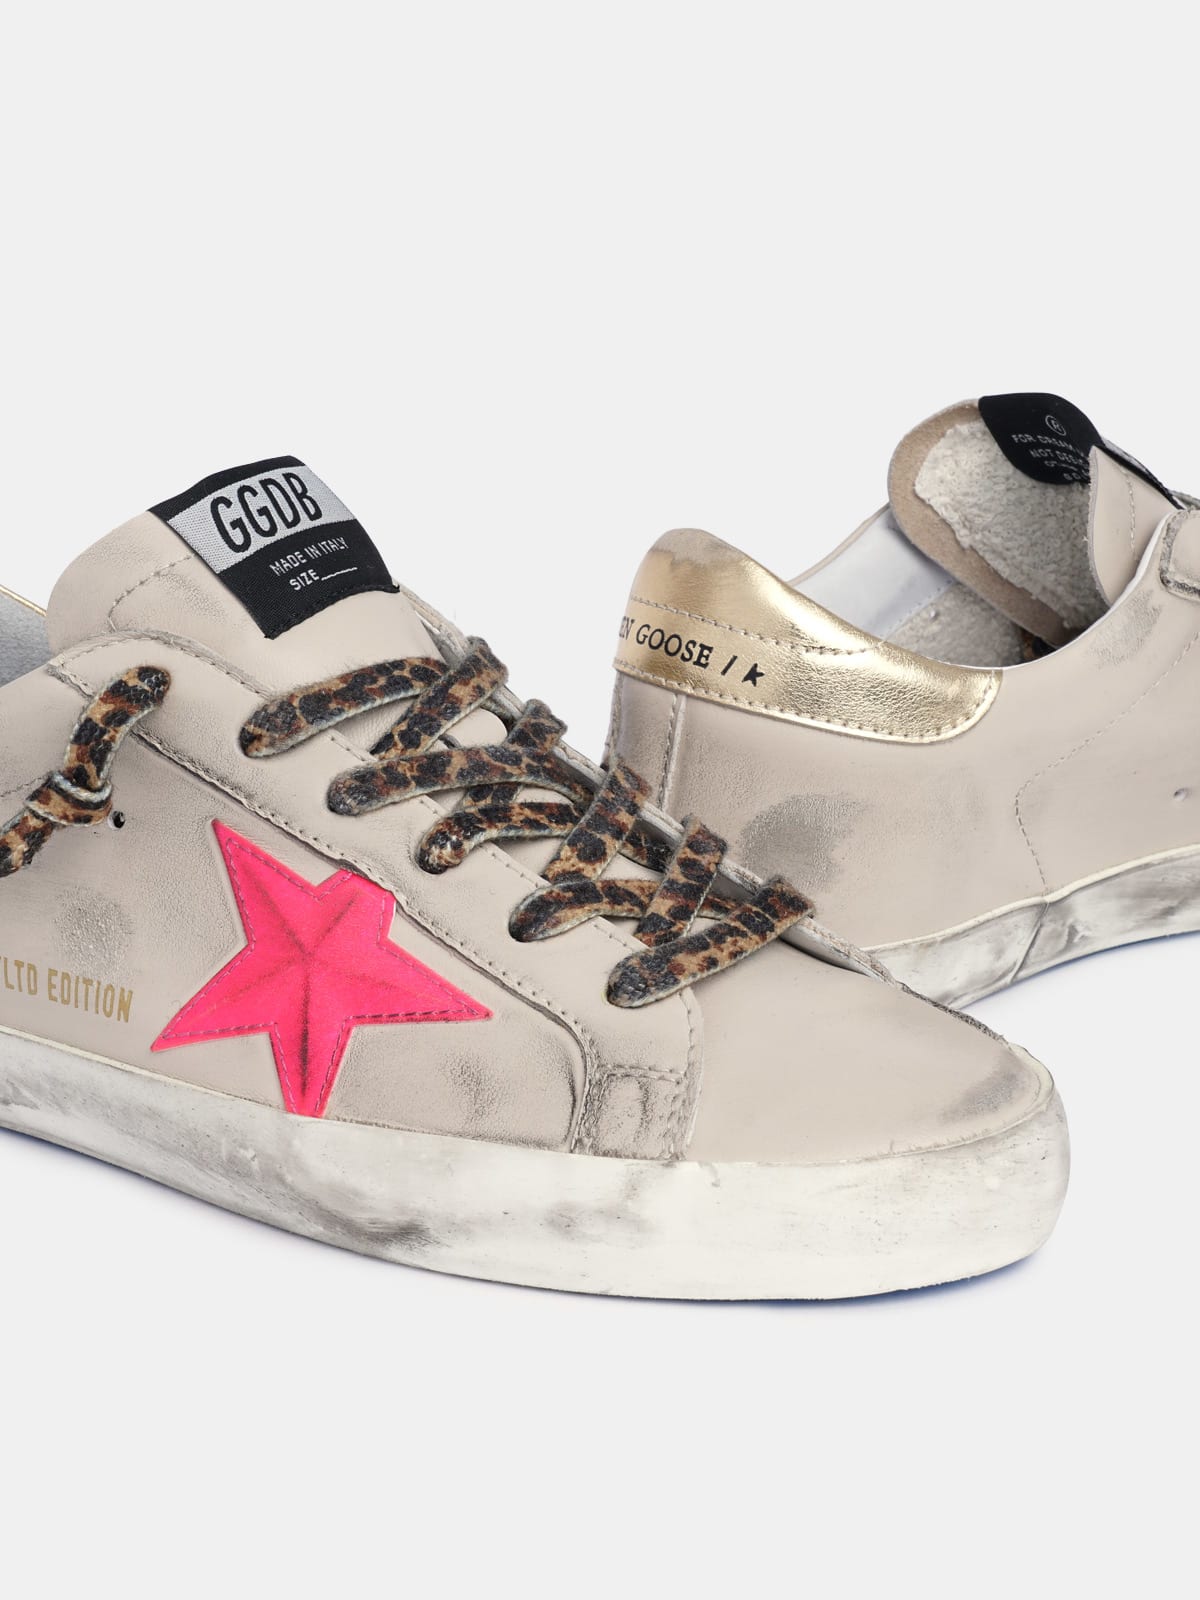 Golden Goose - Super-Star sneakers in beige leather with fuchsia star and gold heel tab in 